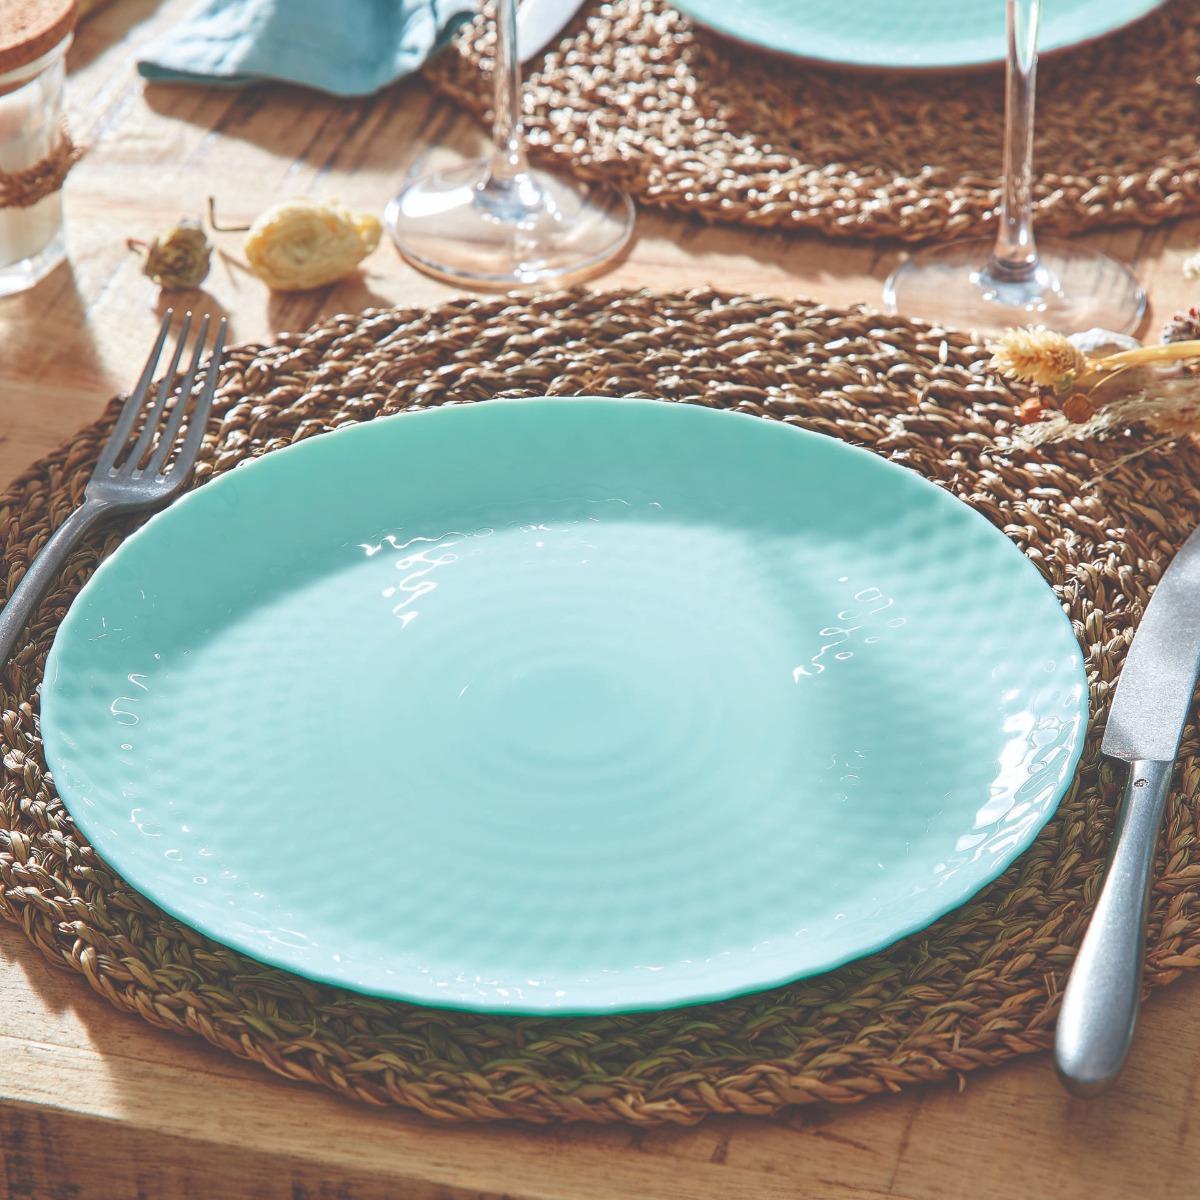 Assiette plate turquoise 25 cm - Pampille - Luminarc